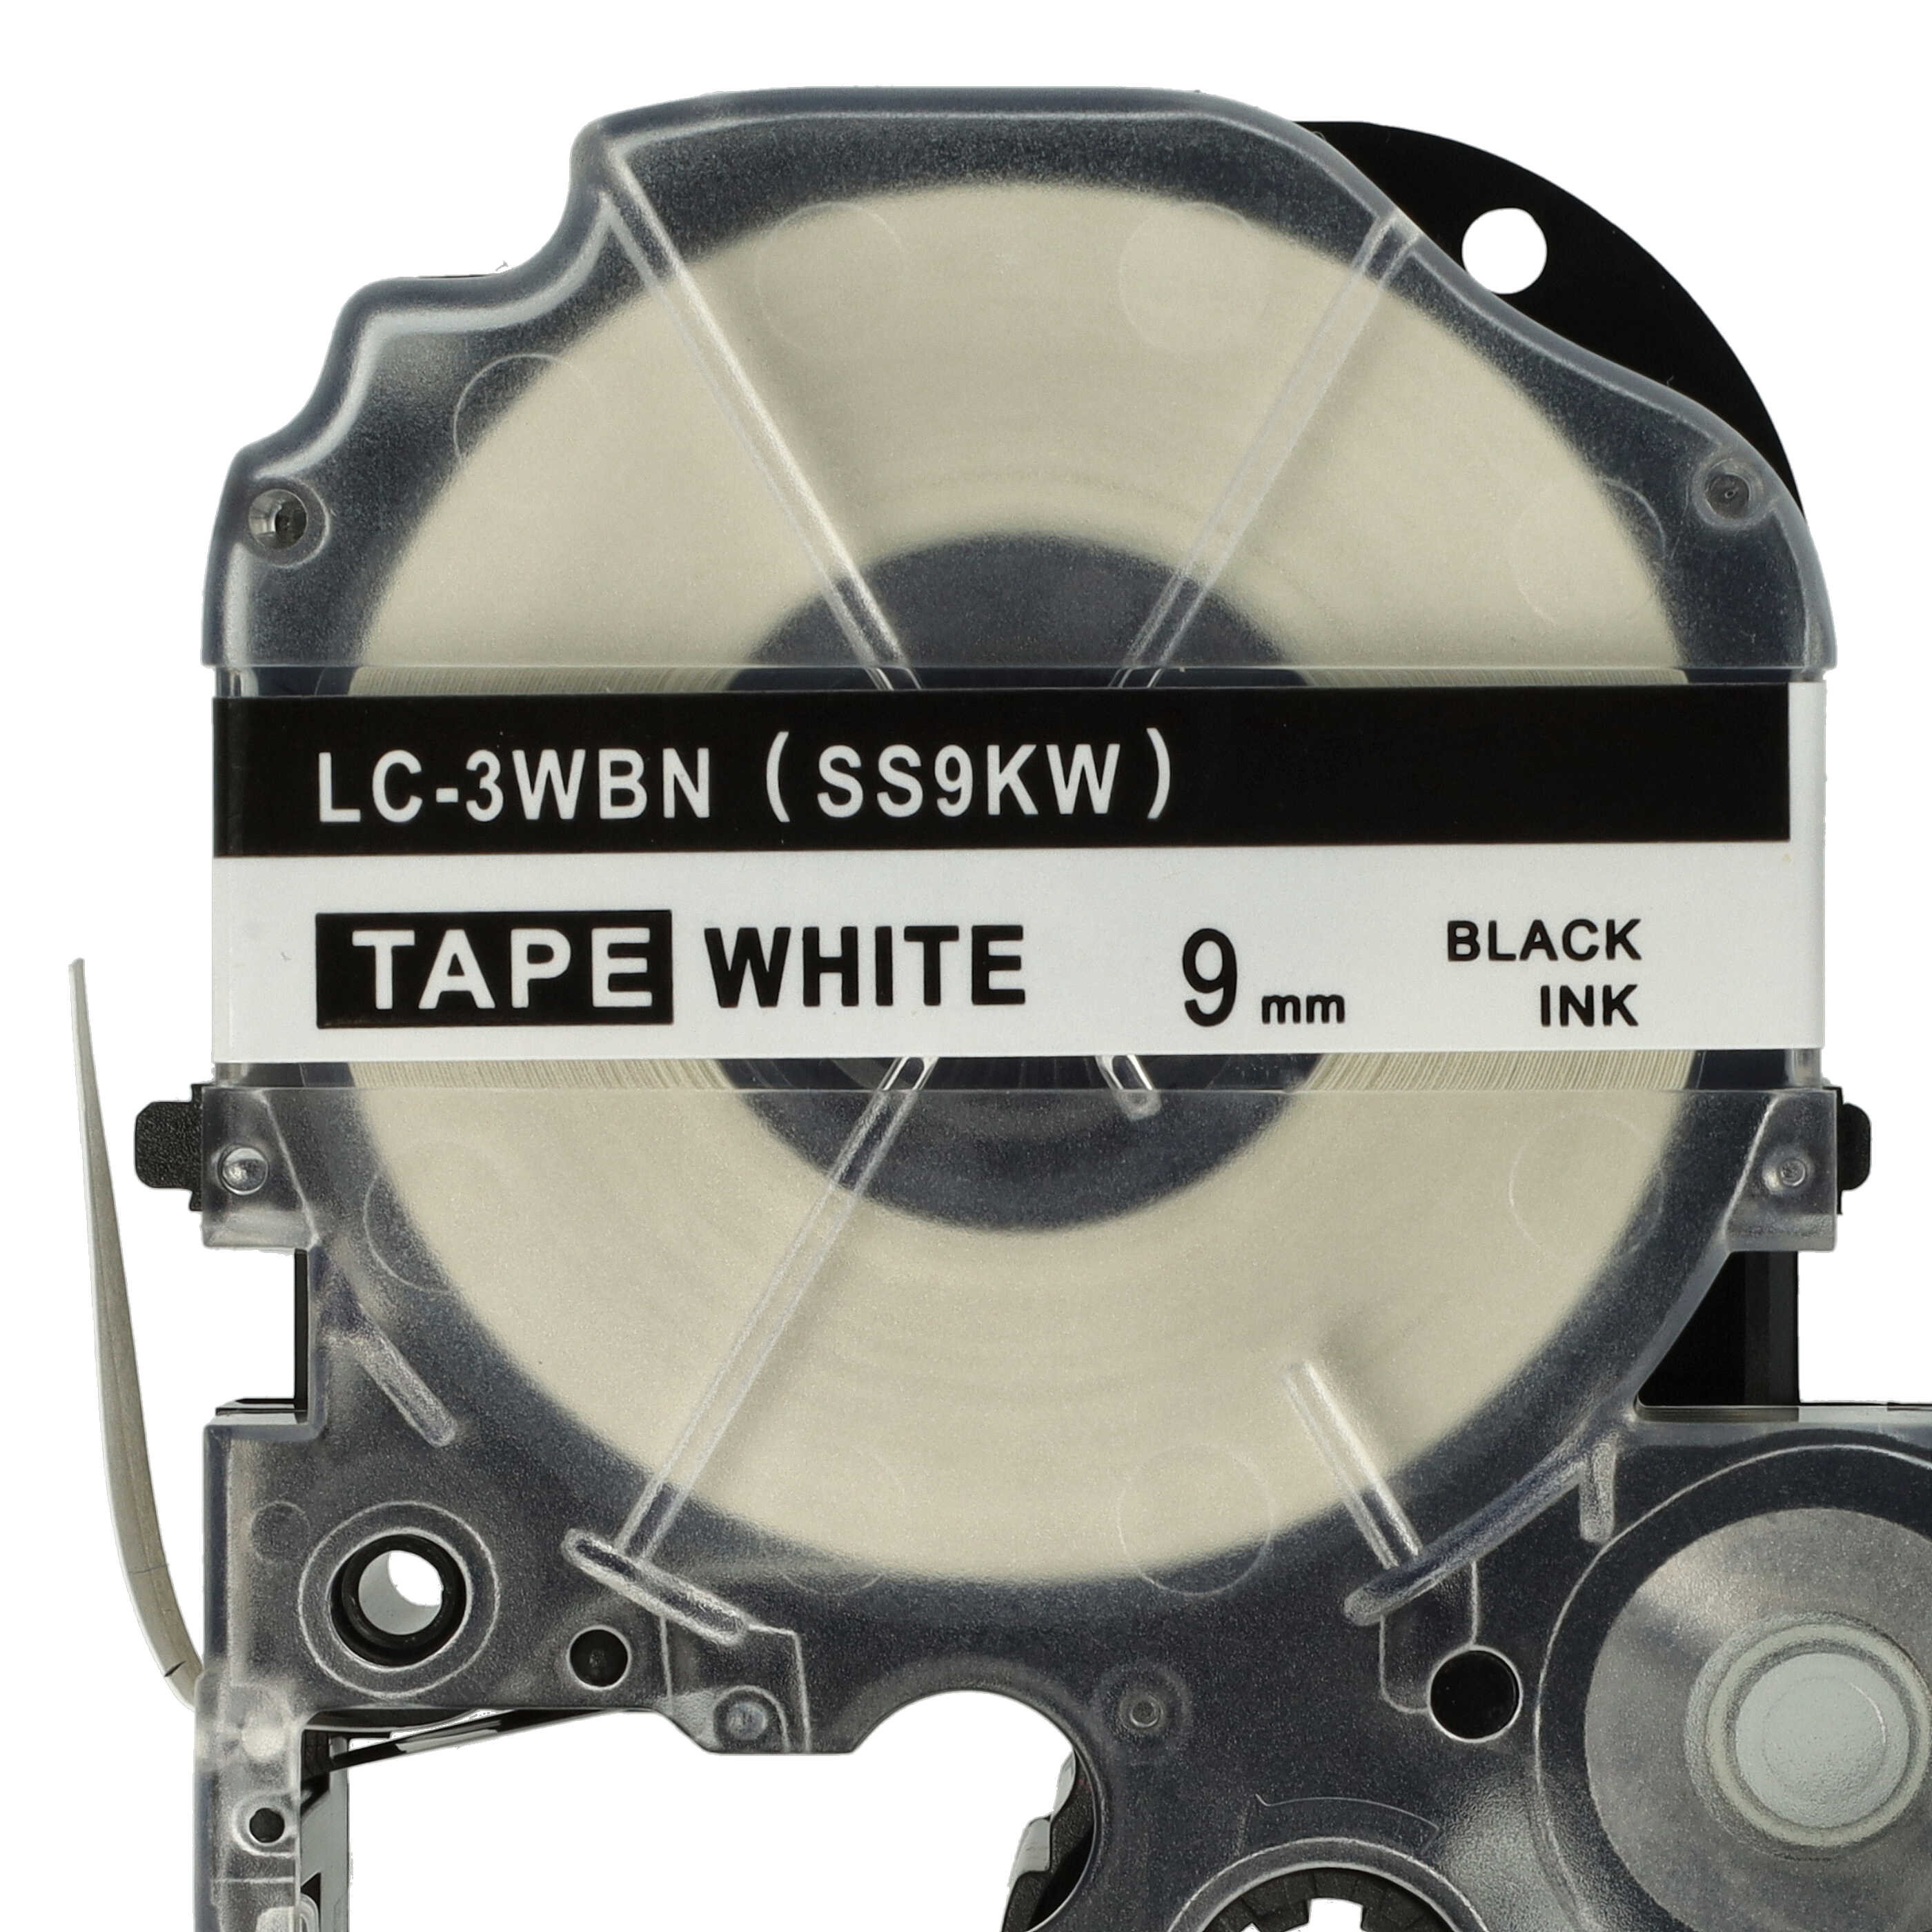 10x Label Tape as Replacement for Epson SS9KW, LC-3WBN - 9 mm Black to White